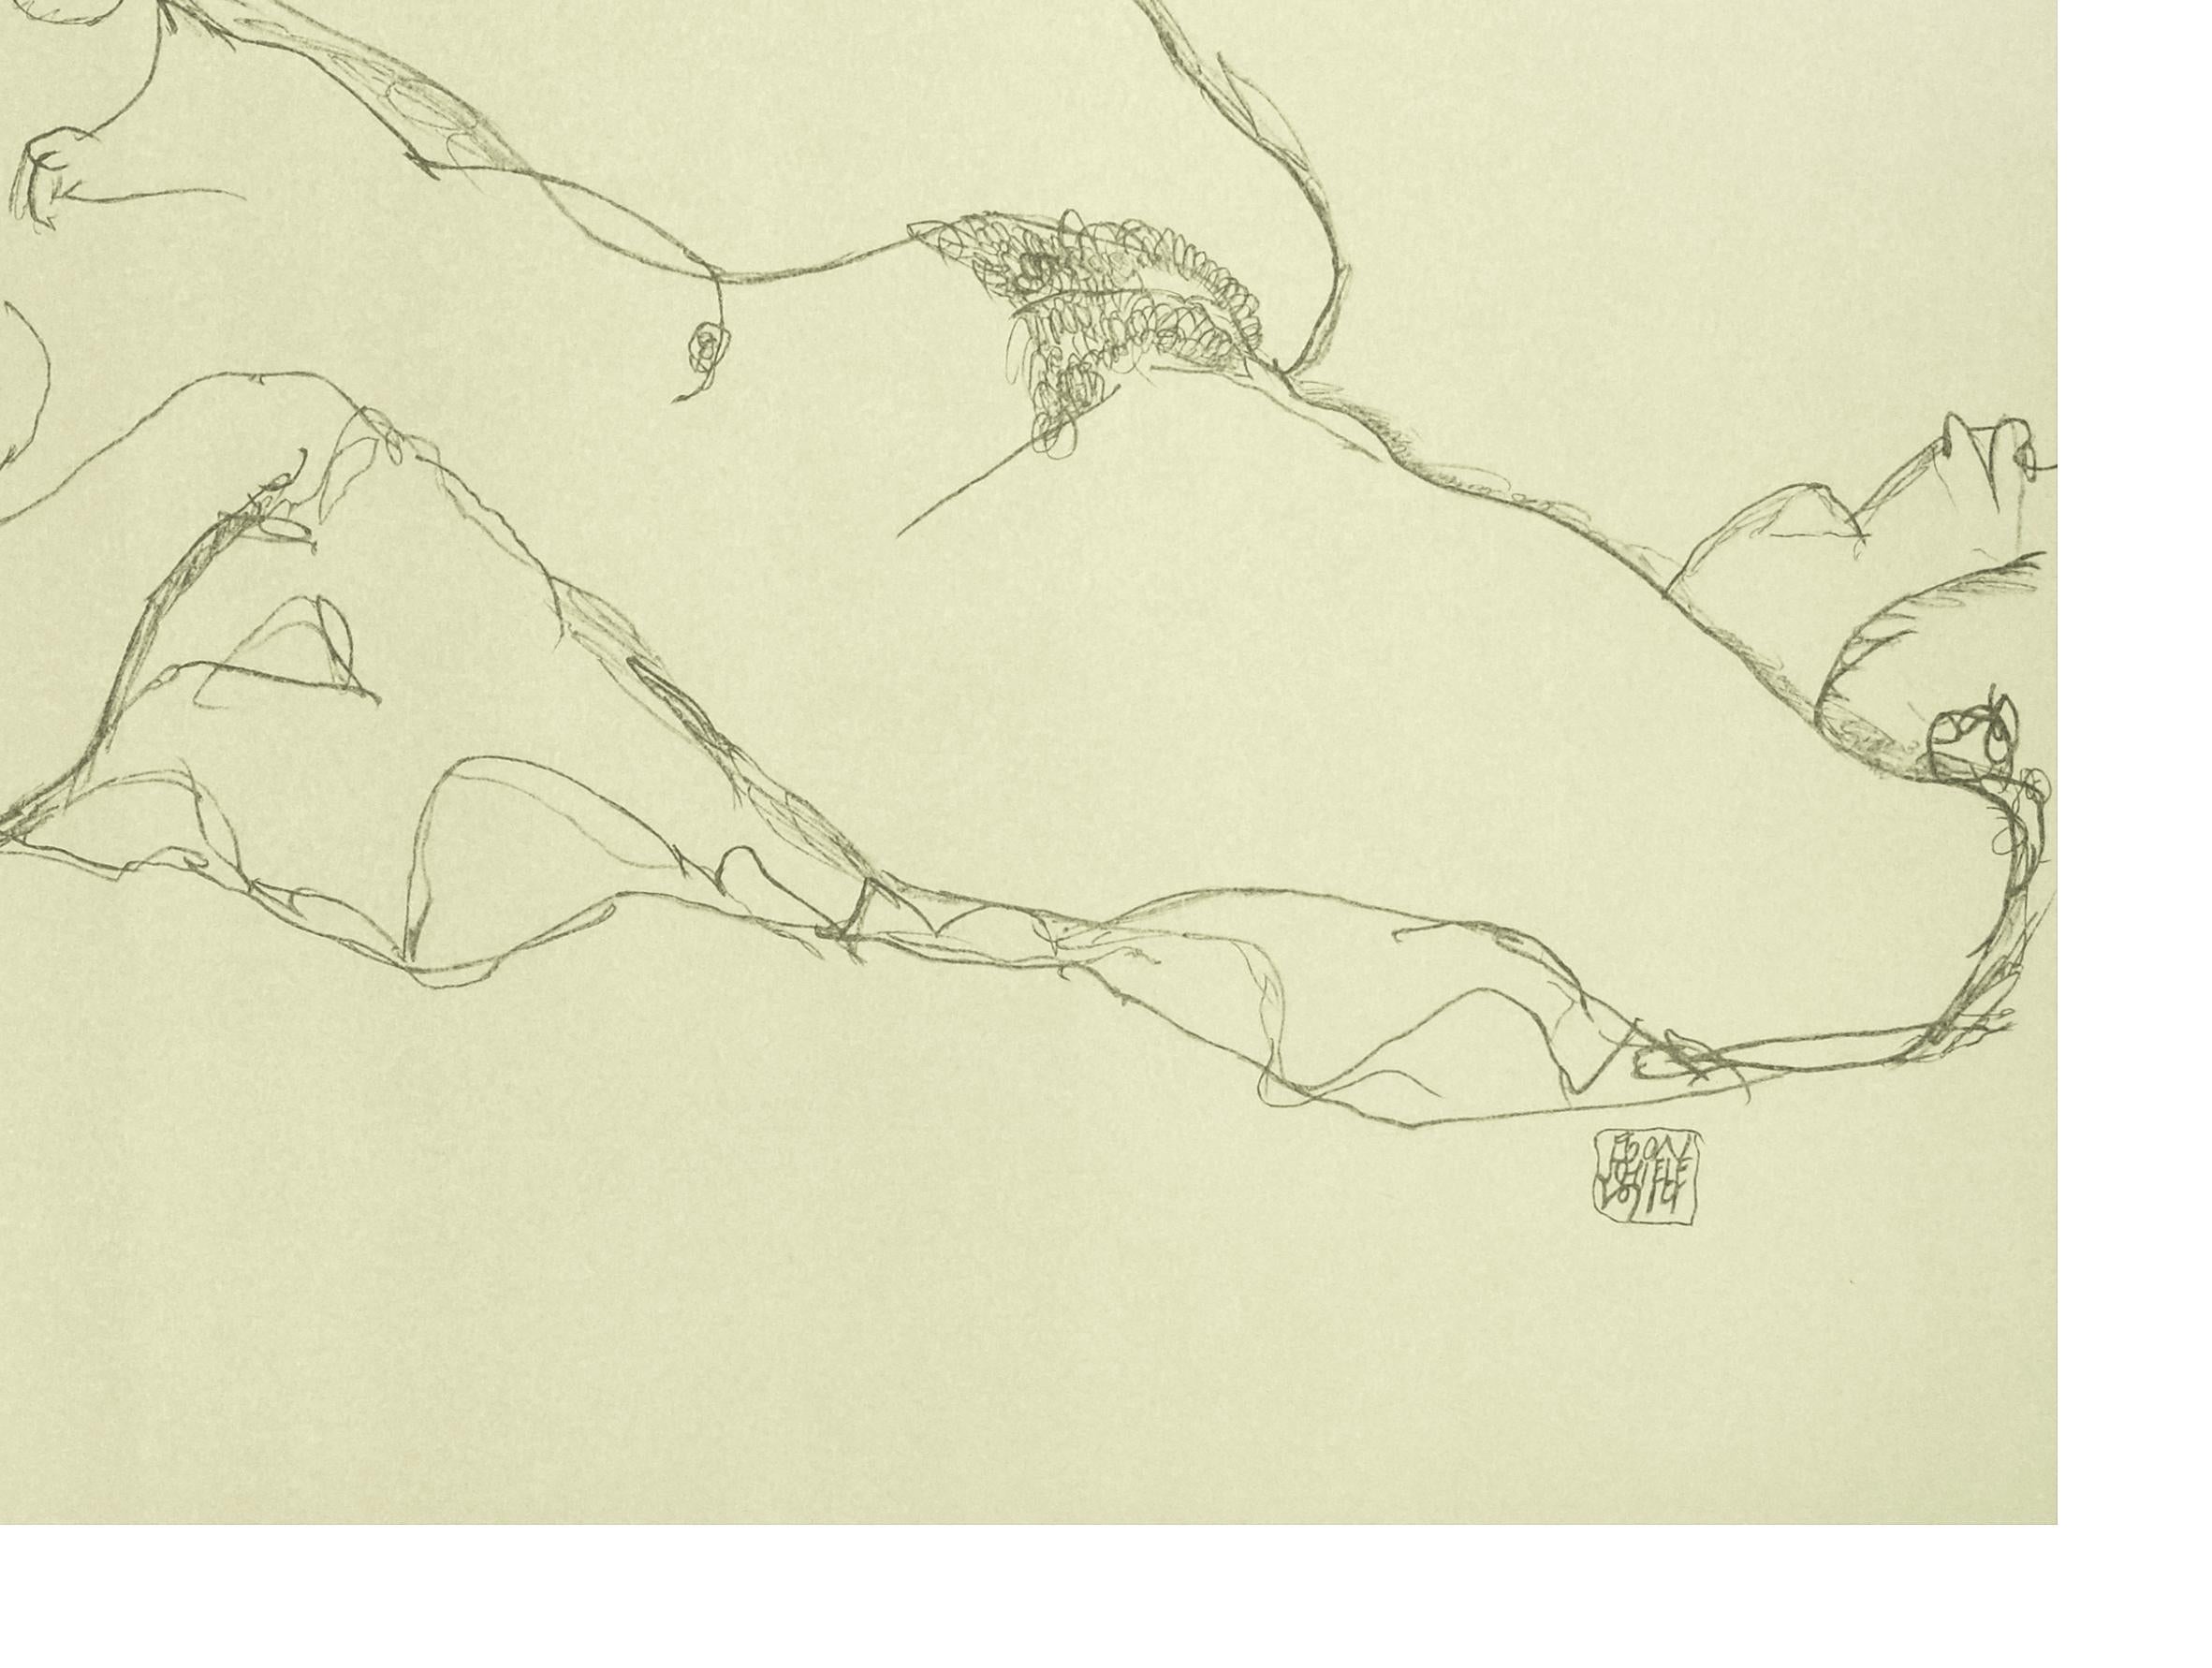 Reclining Nude, Left Leg Raised - 2000s - Lithograph After Egon Schiele - Print by (after) Egon Schiele